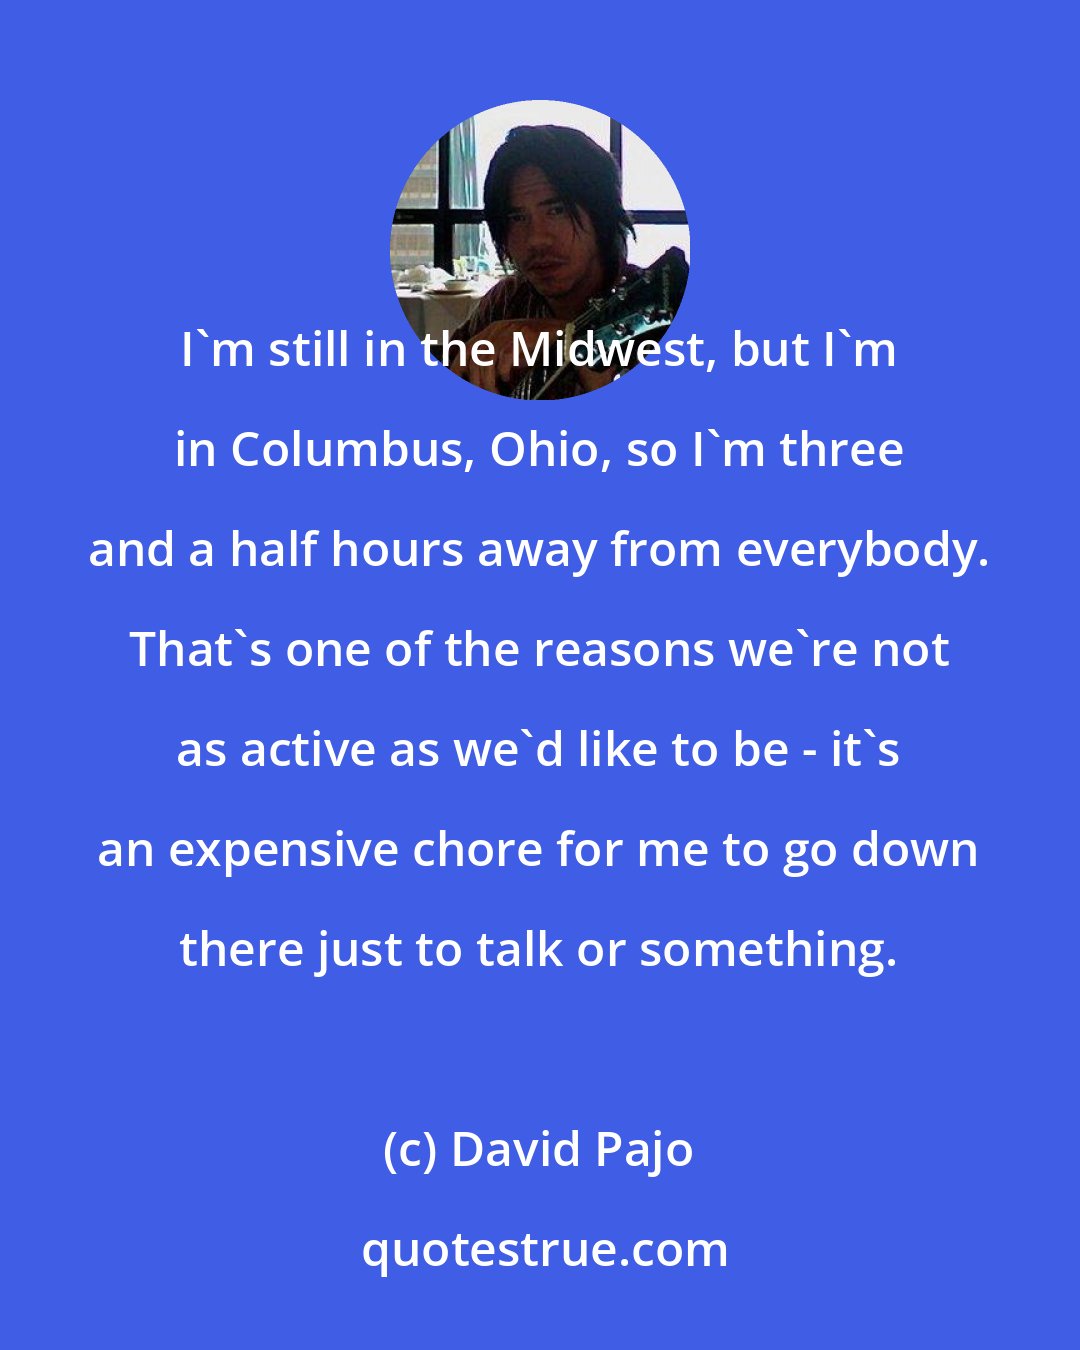 David Pajo: I'm still in the Midwest, but I'm in Columbus, Ohio, so I'm three and a half hours away from everybody. That's one of the reasons we're not as active as we'd like to be - it's an expensive chore for me to go down there just to talk or something.